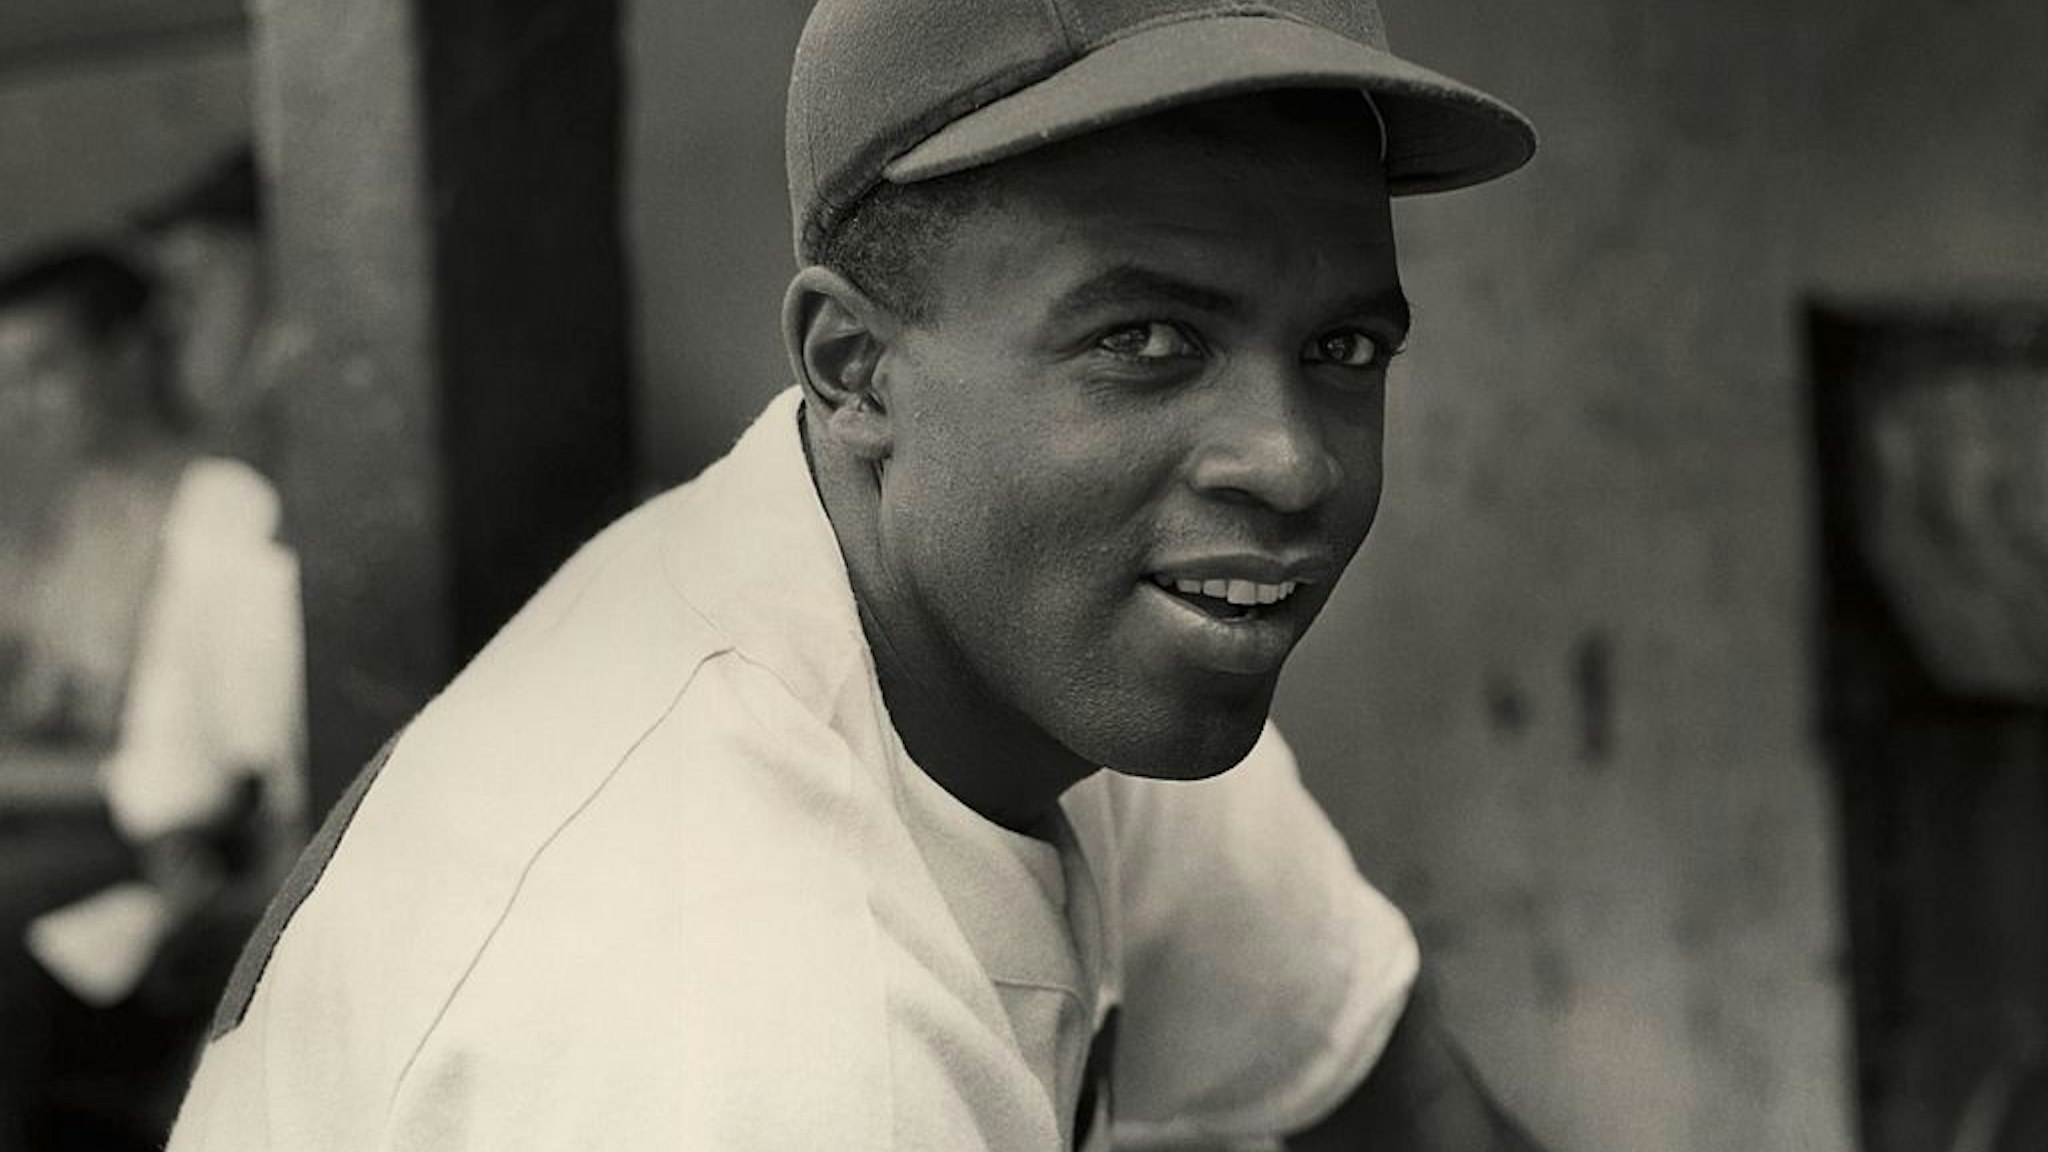 circa 1945: A portrait of the Brooklyn Dodgers' infielder Jackie Robinson in uniform. (Photo by Hulton Archive/Getty Images)